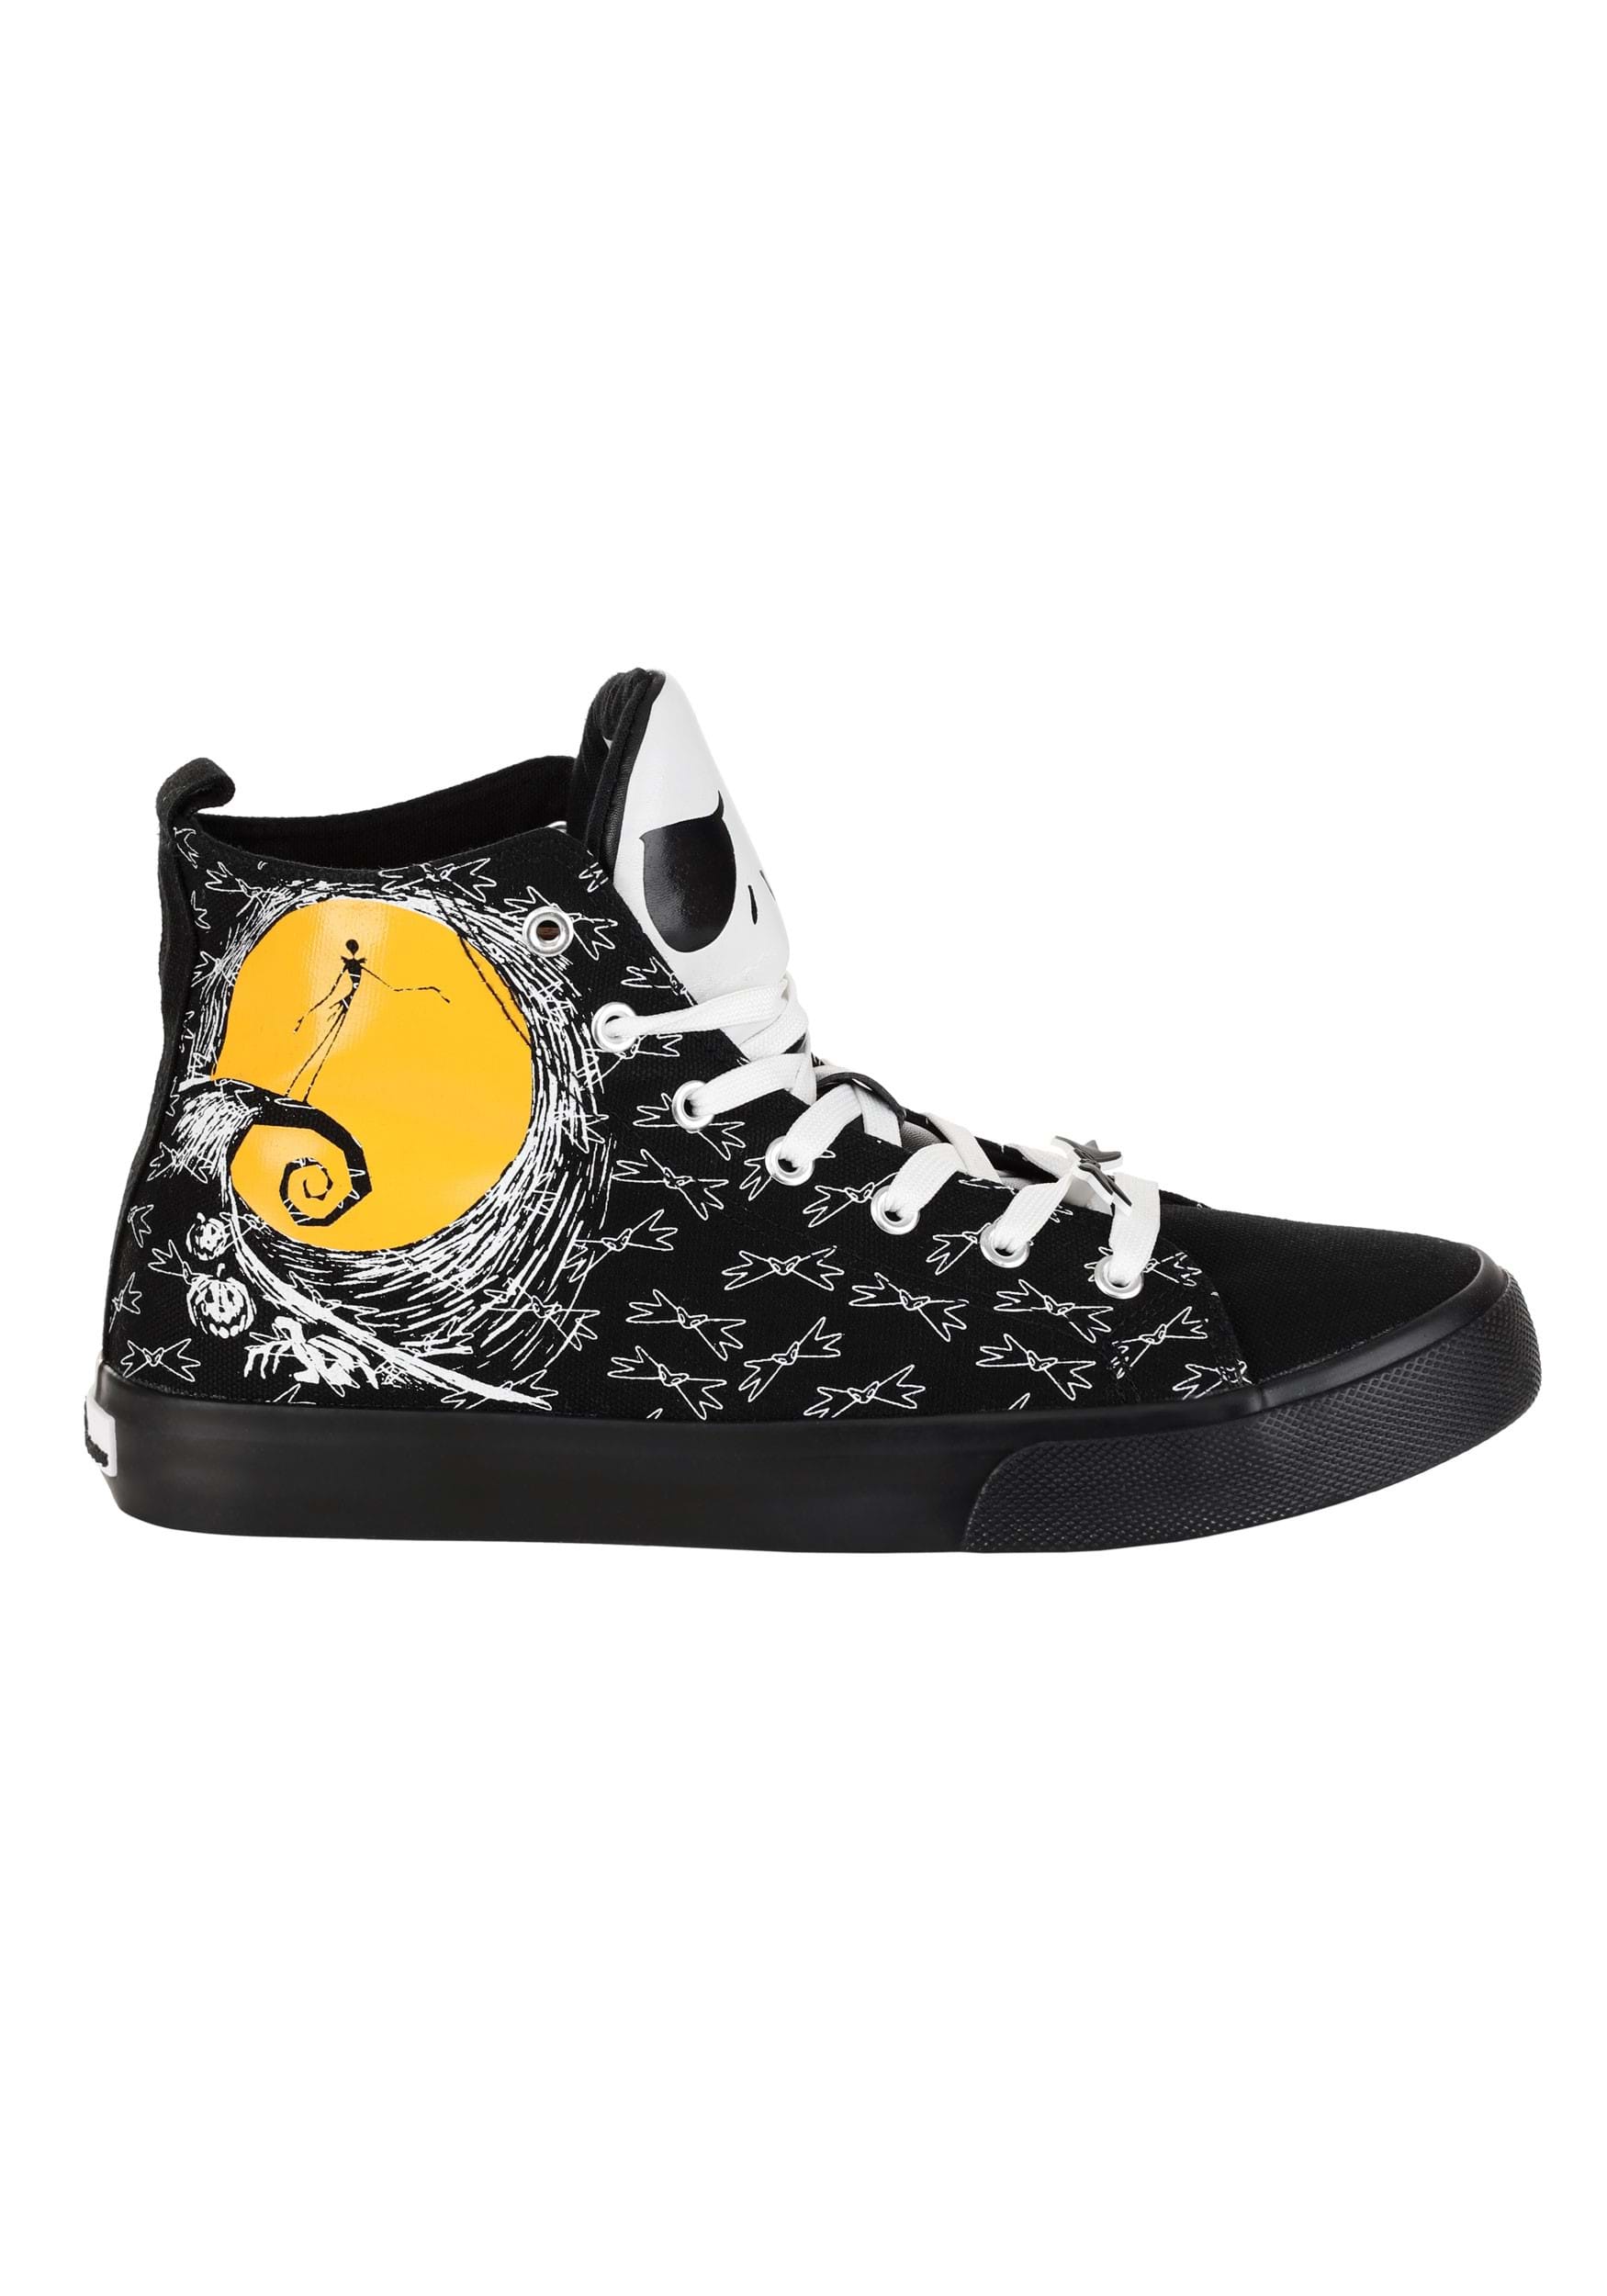 Jack Skellington The Nightmare Before Christmas Anime Shoes Hand Painted Shoes 